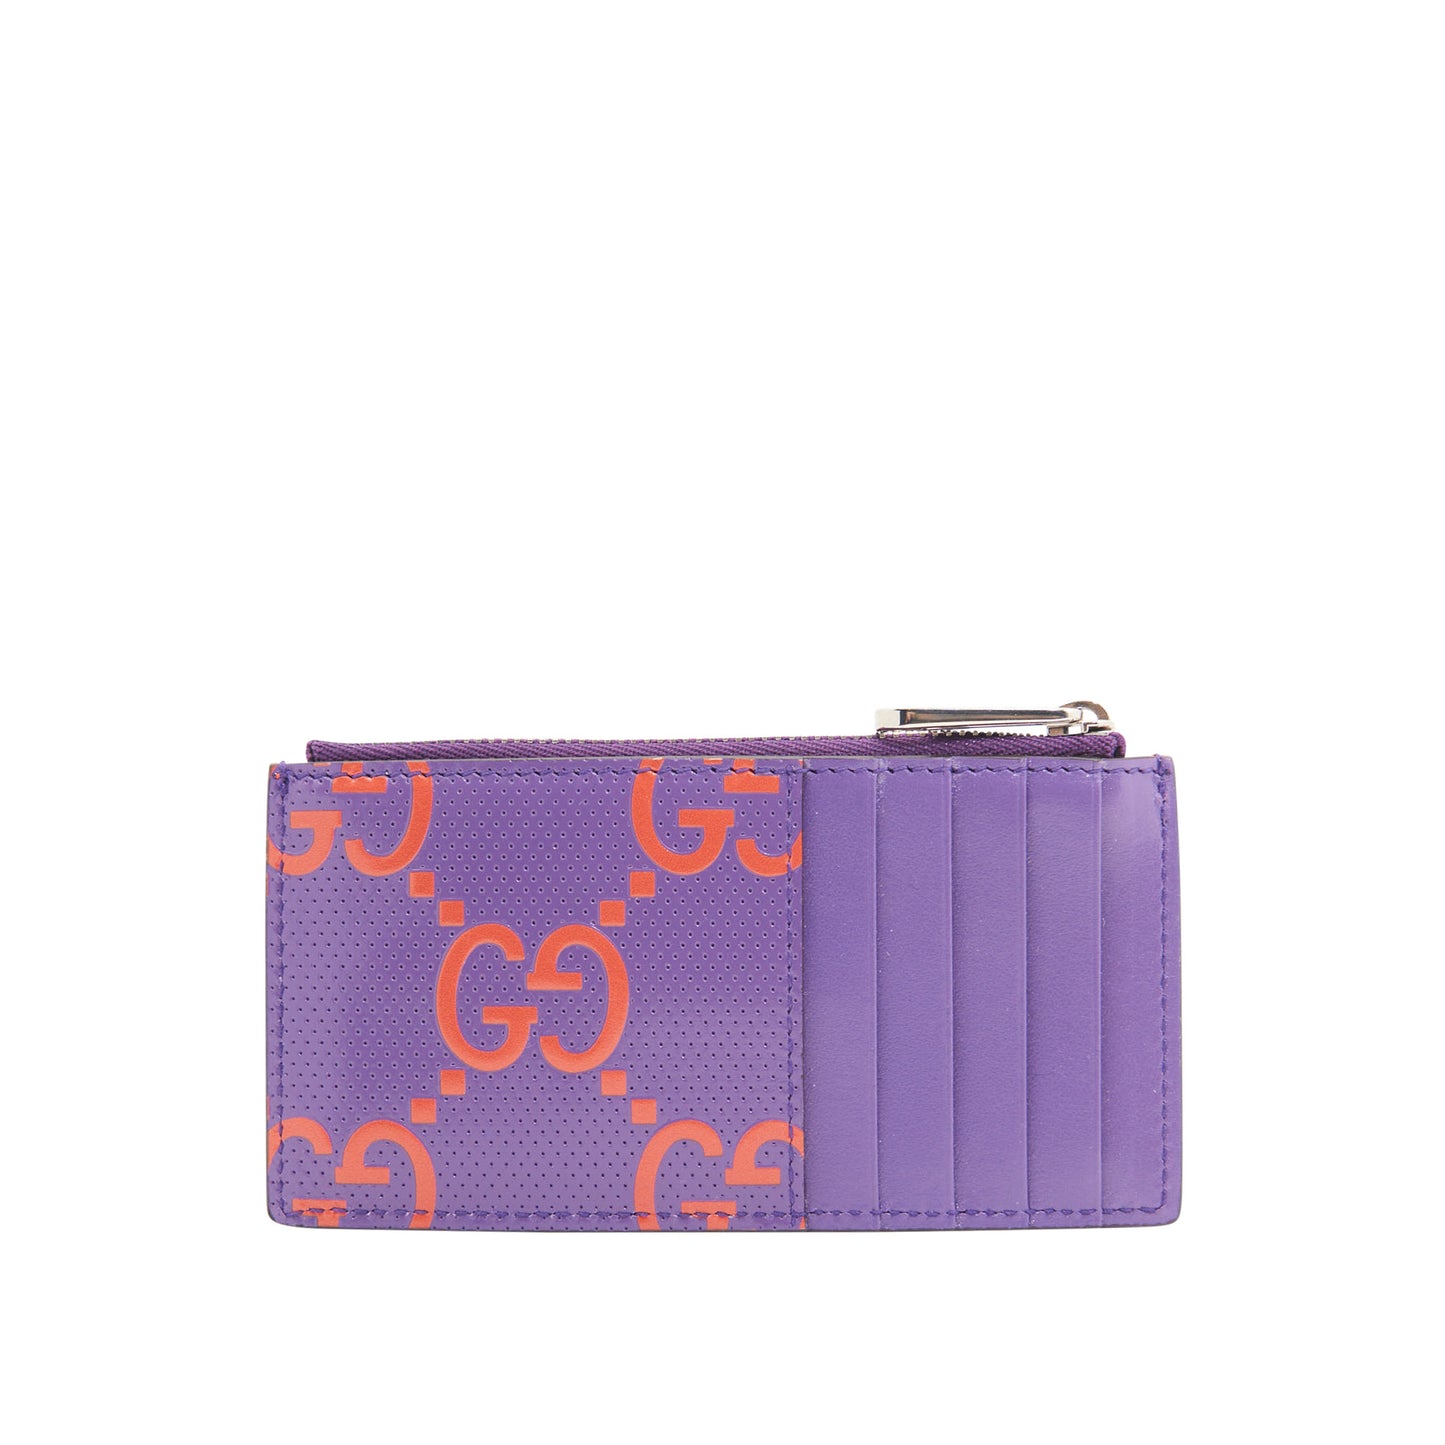 Gucci Canvas GG Embossed Card Case in Purple SHW